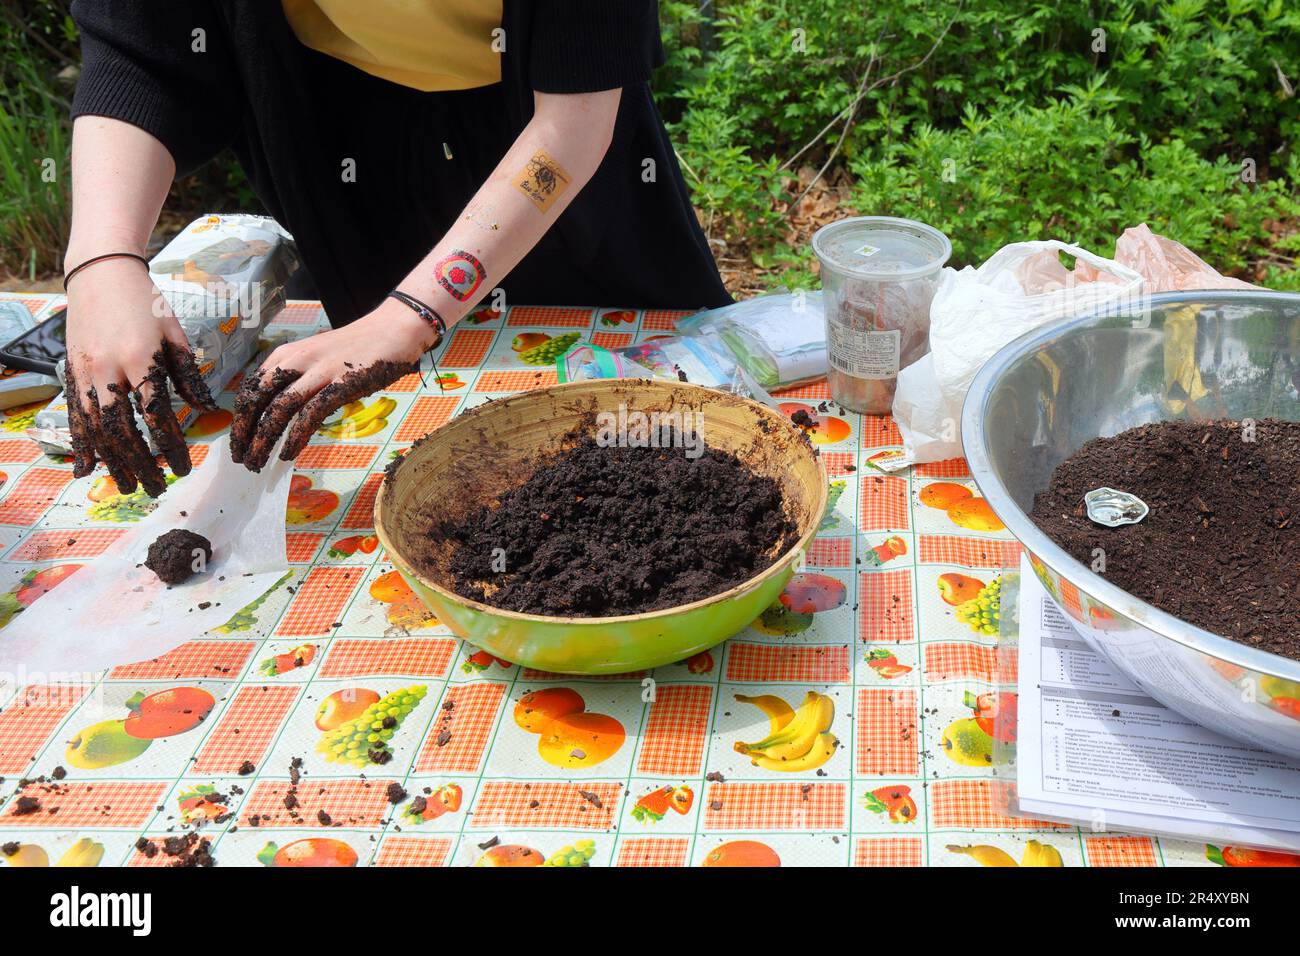 A Bee Conservancy person demonstrates making native wildflower seed bombs, seed balls, at Earth Matter on Govenors Island, New York. Stock Photo